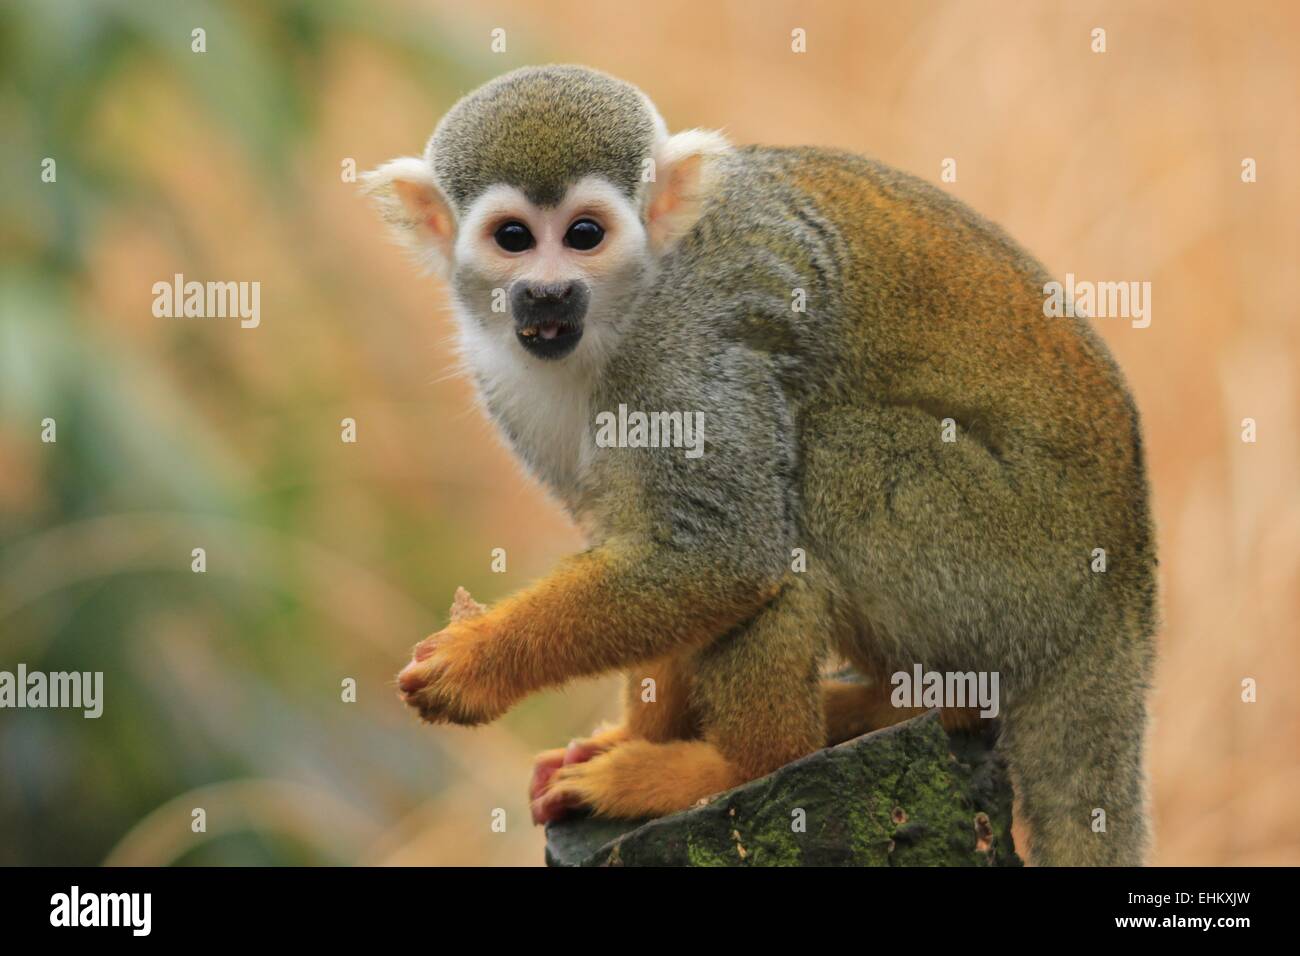 Common Squirrel Monkey eating some scavenged food. Stock Photo